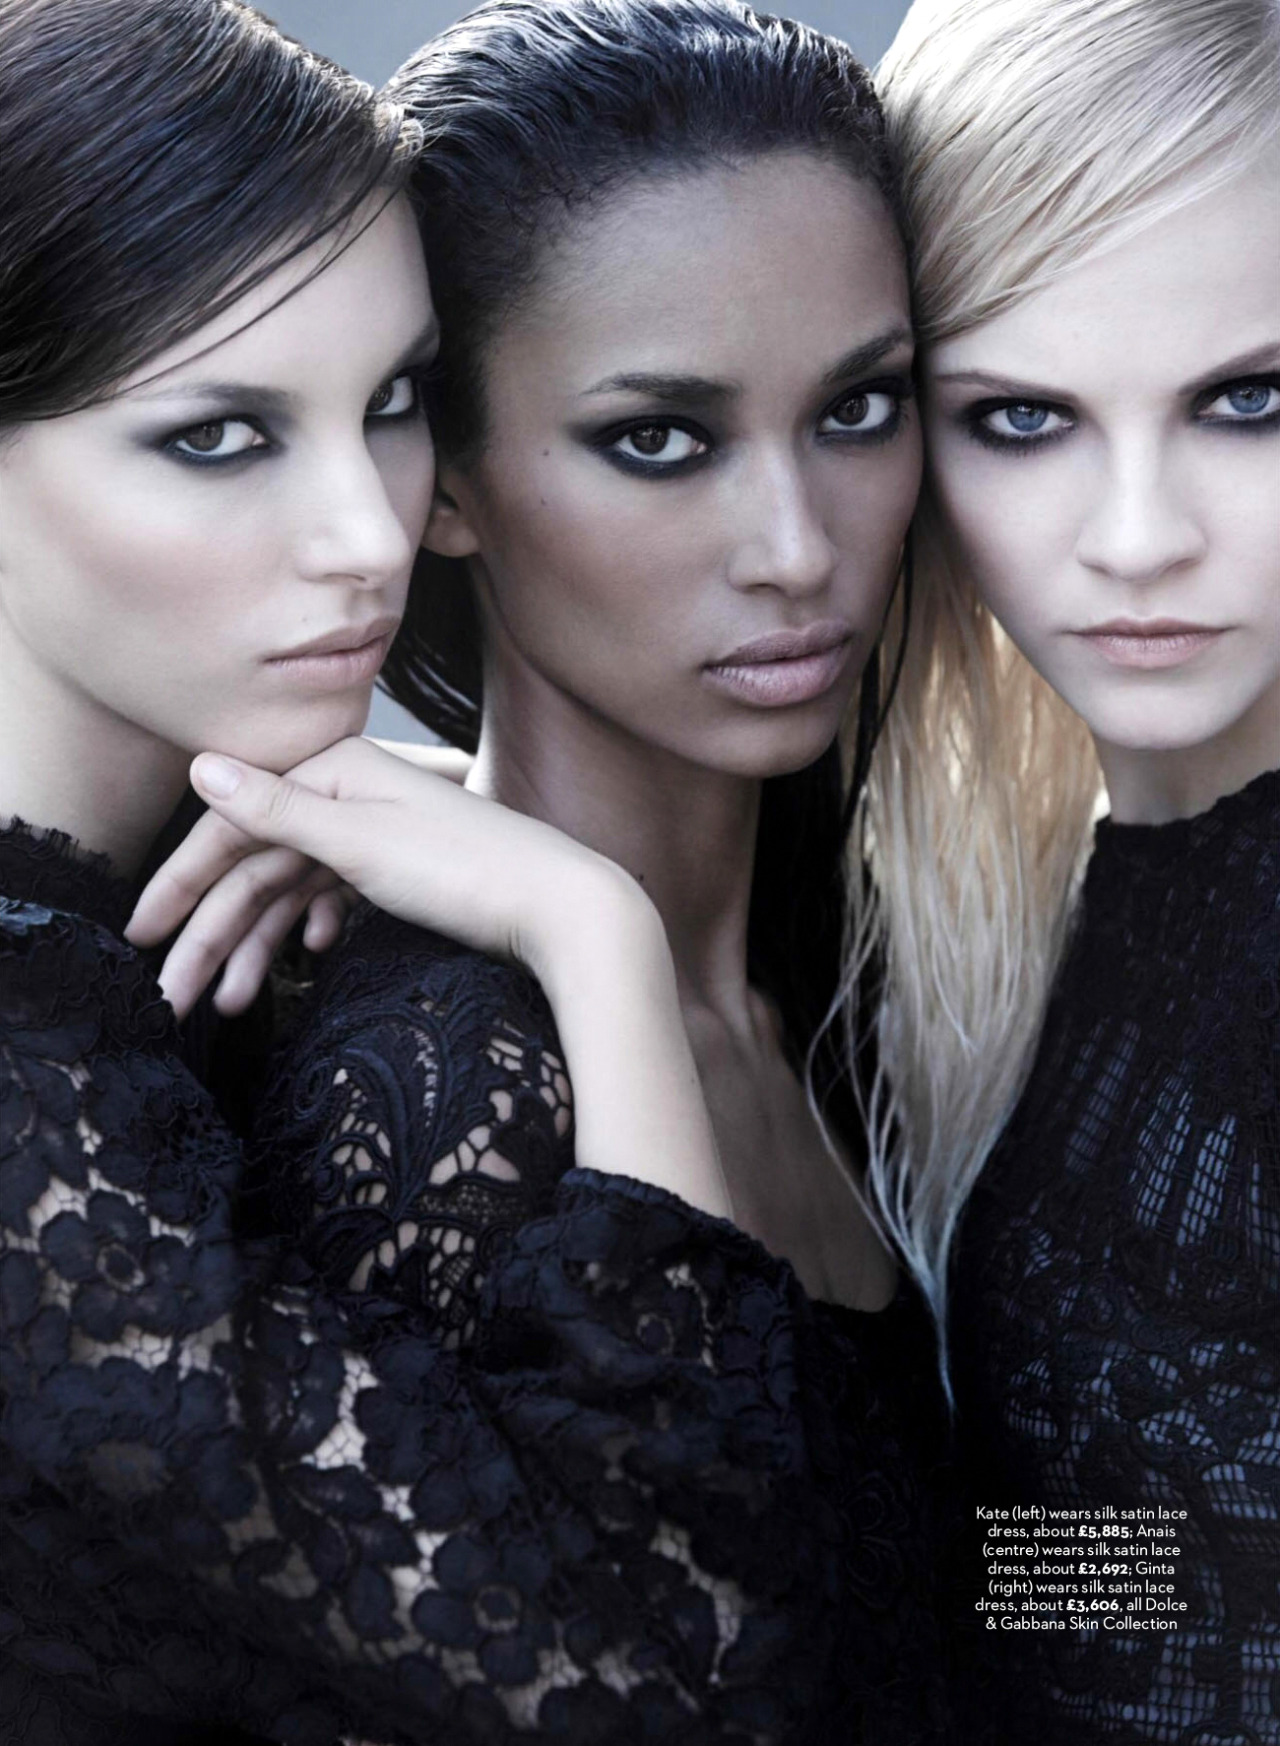 <br /><br /><br /><br /><br /><br /> Kate King, Anais Mali and Ginta Lapina by Simon Upton for Marie Claire UK August 2014<br /><br /><br /><br /><br /><br /> 